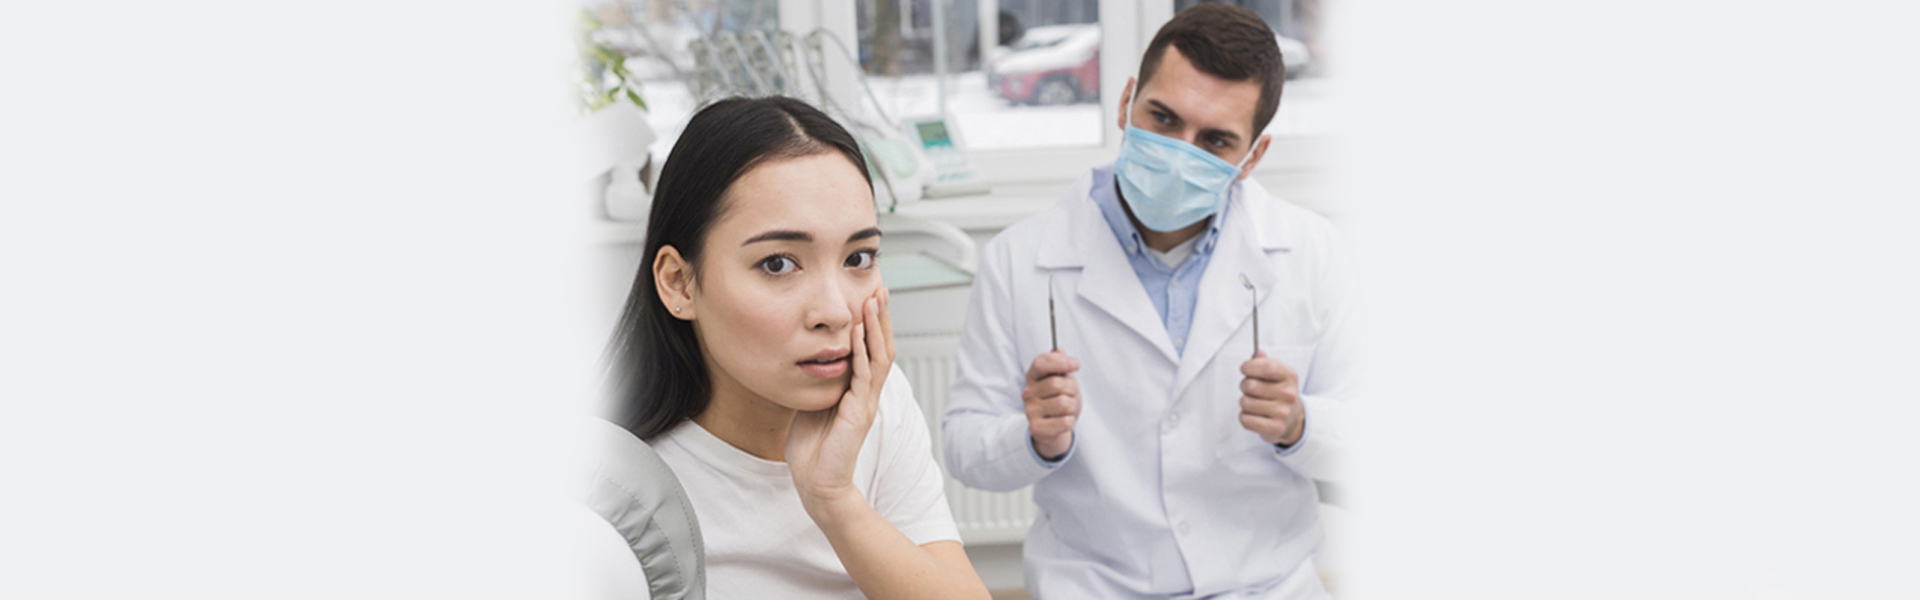 When Does an Emergency Dentist Become Necessary?